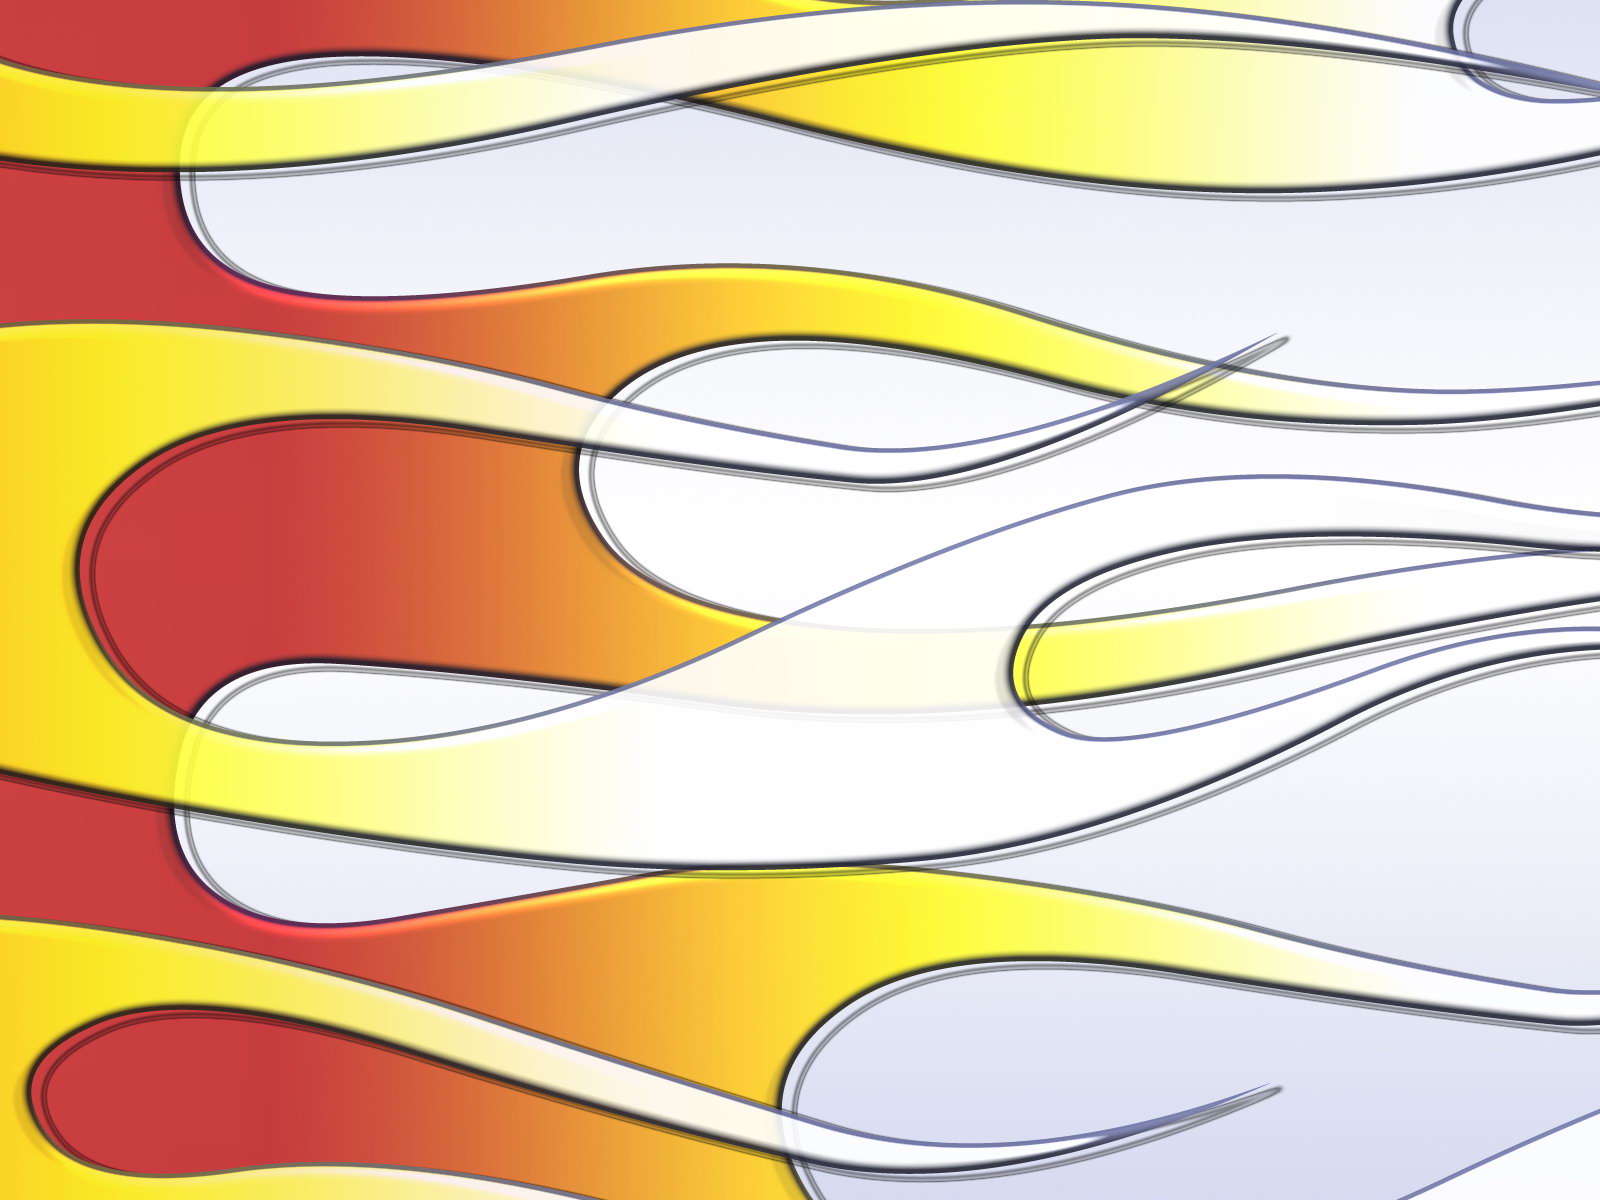 Artistic Flame HD Wallpaper | Background Image